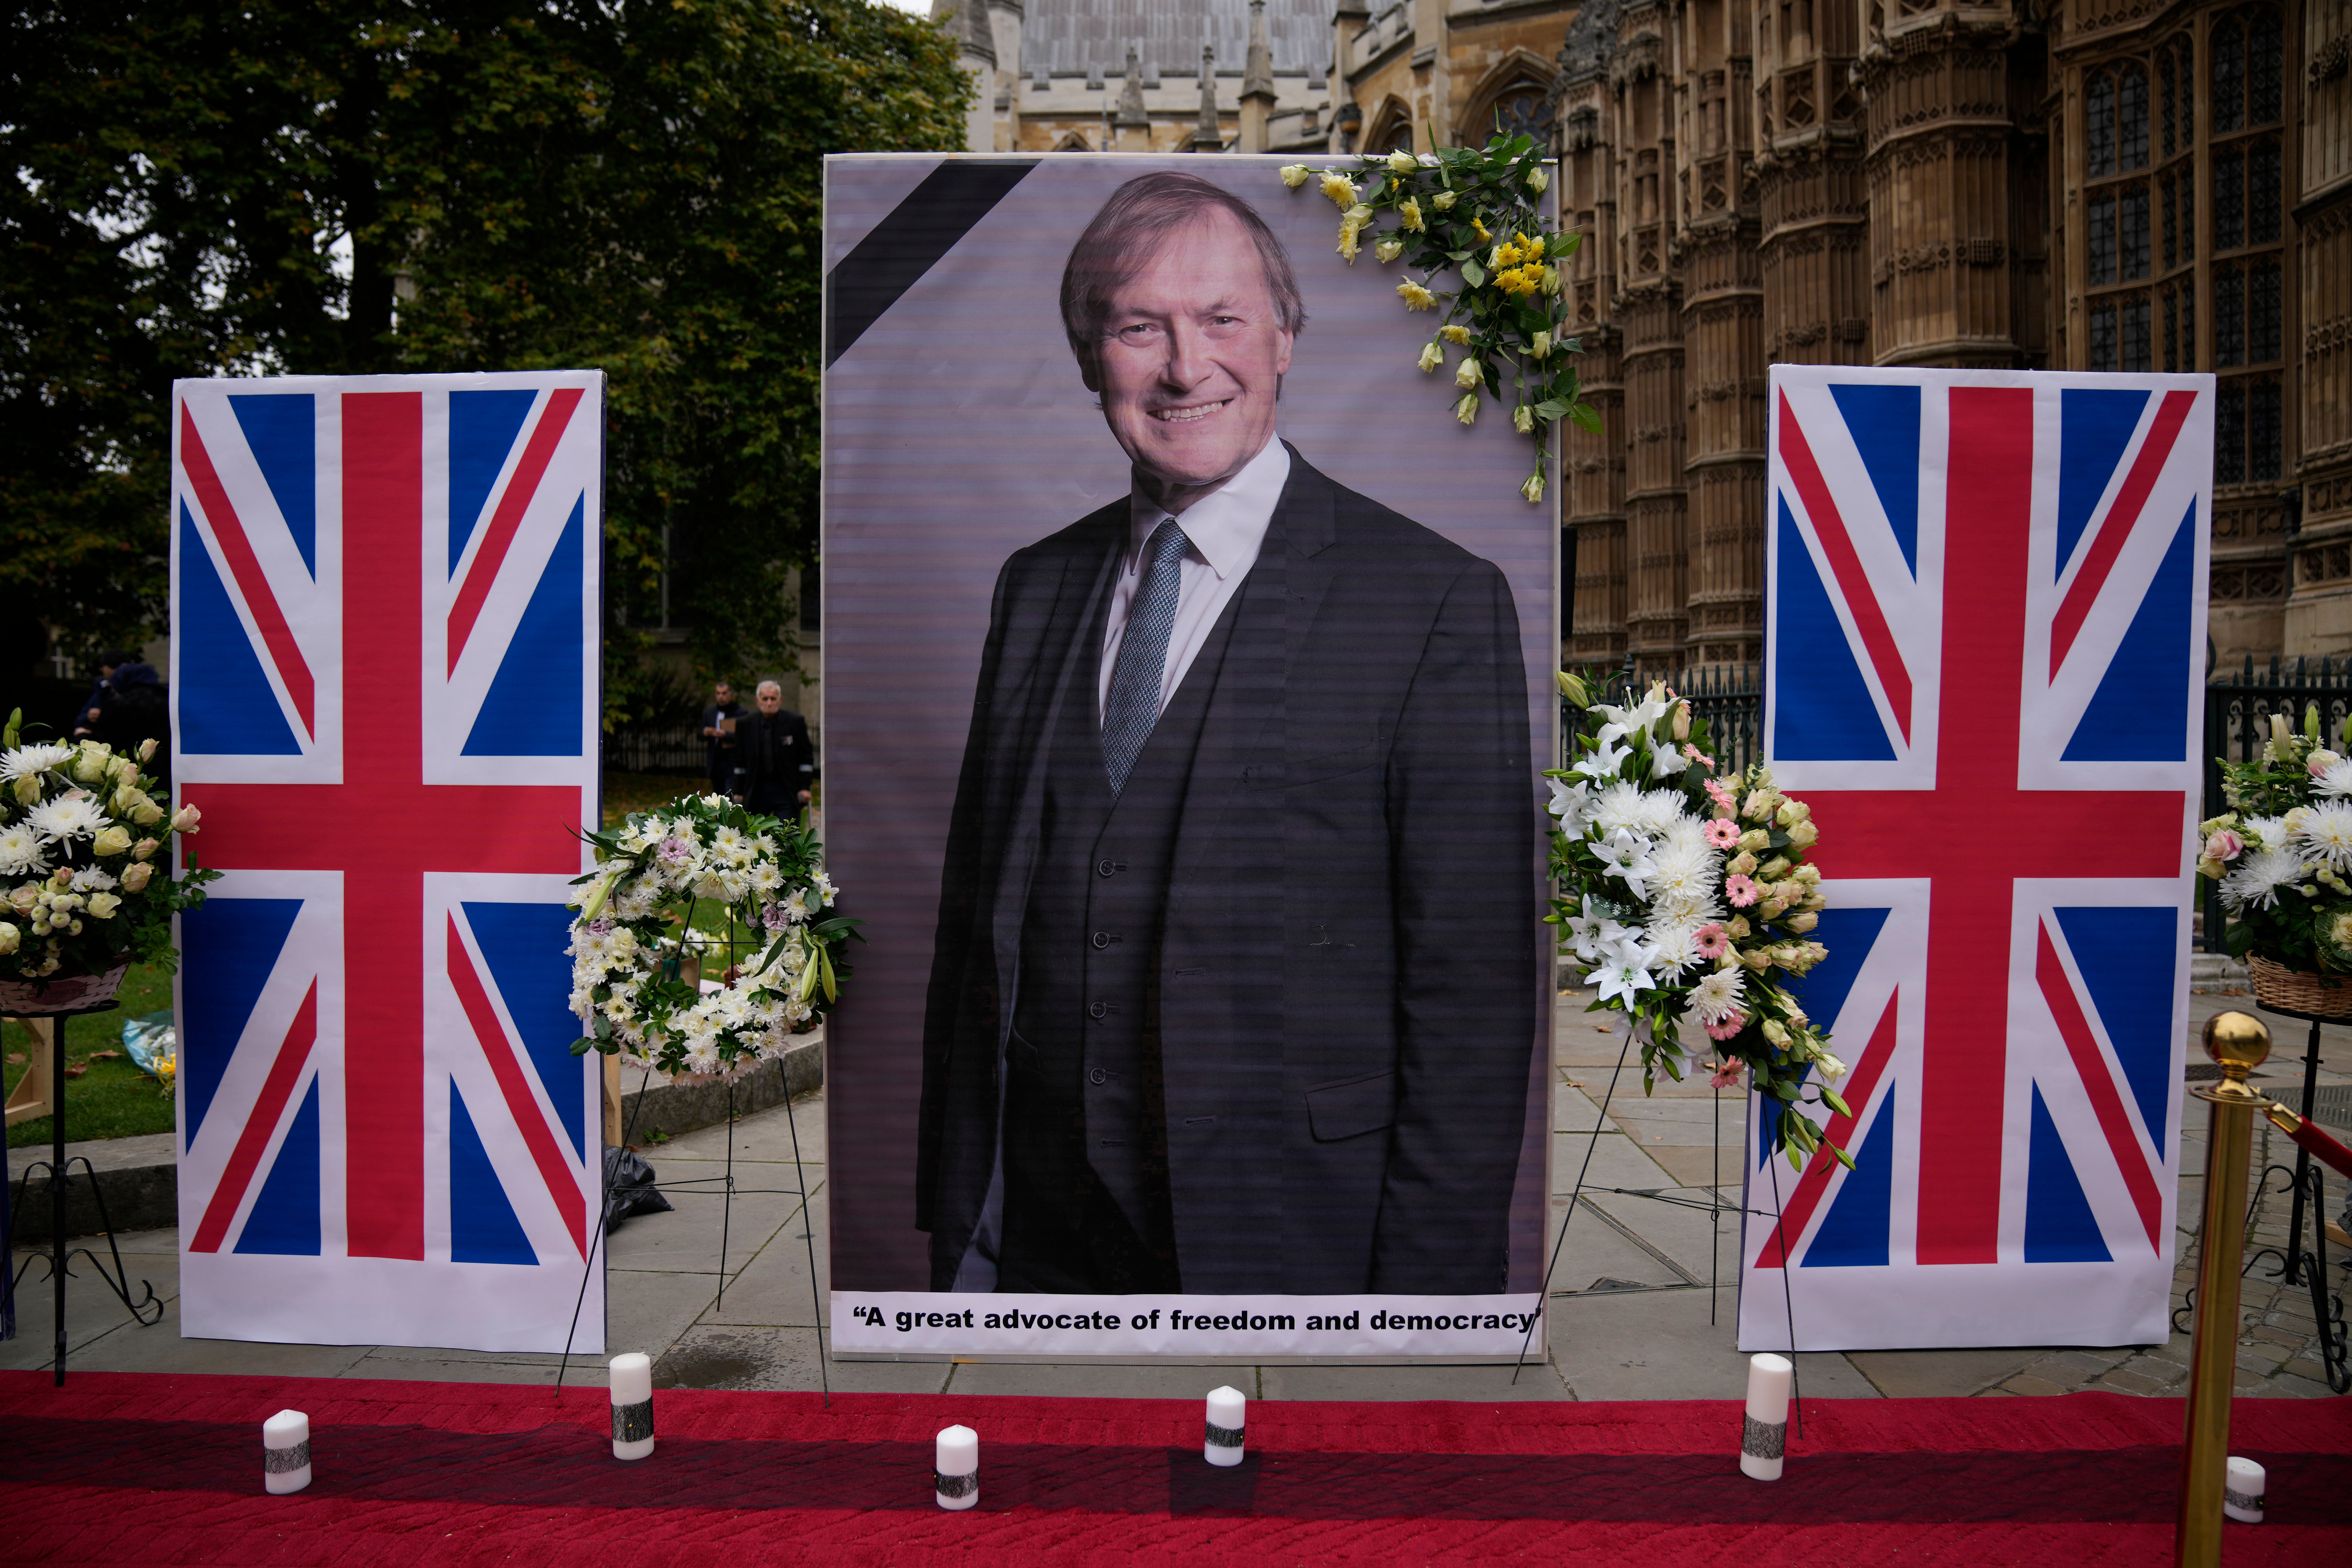 An image of Sir David Amess opposite the Houses of Parliament, placed in tribute to the MP who was killed while during a constituency surgery